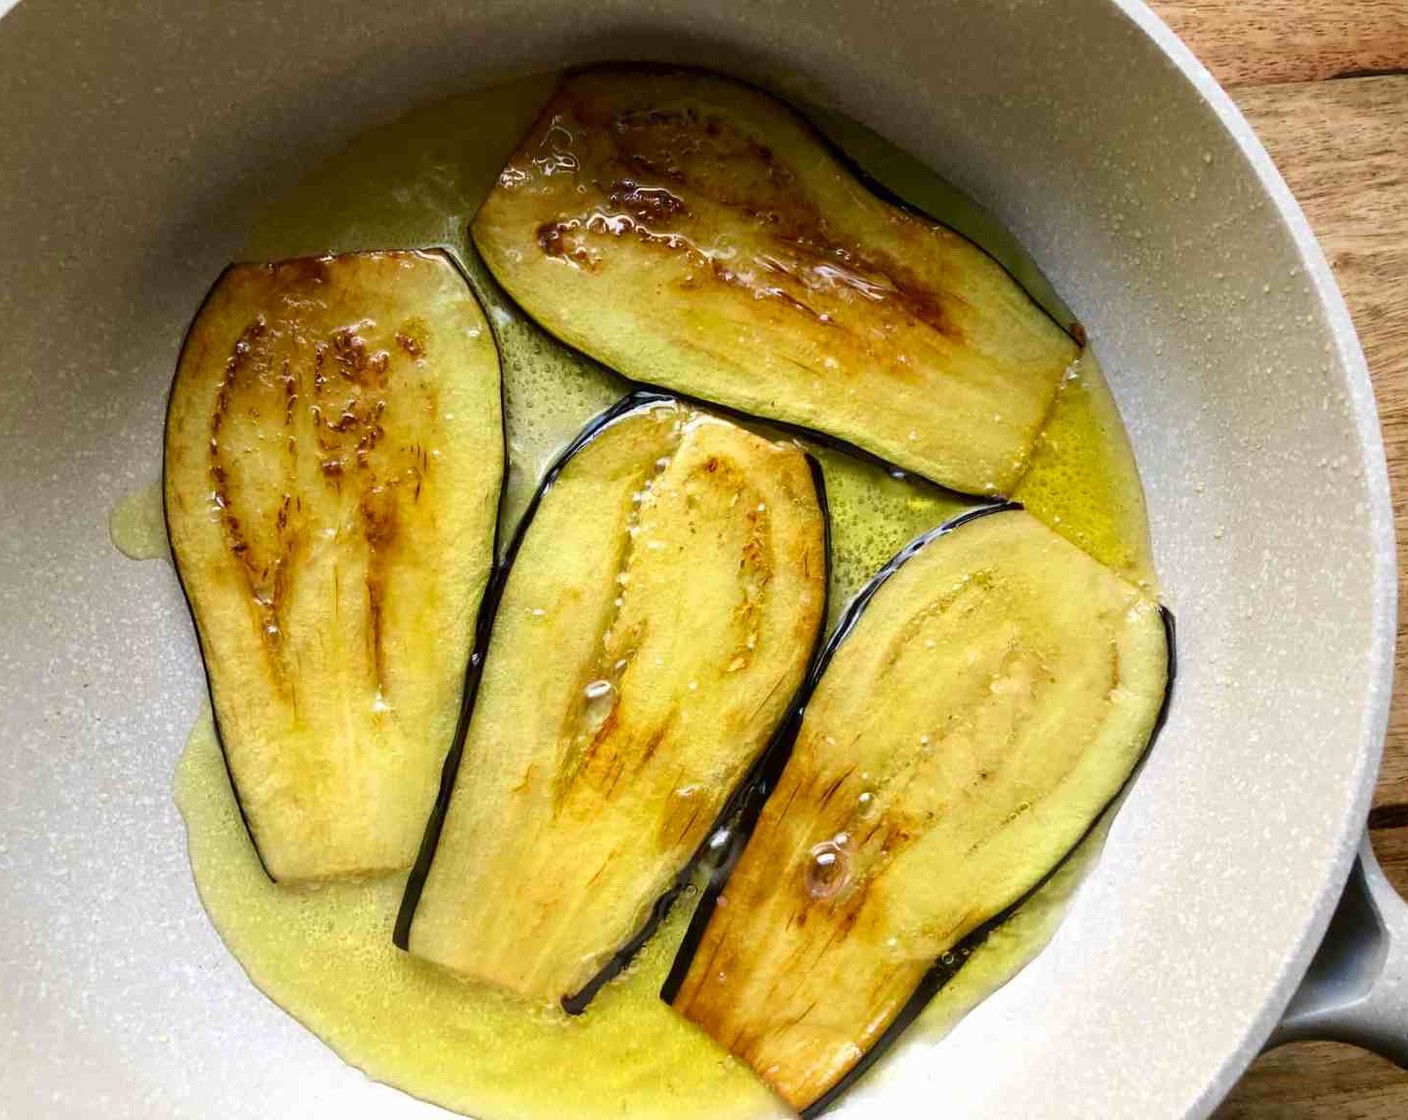 step 5 When done, place them in a single layer on sheets of parchment paper to prevent sticking. Heat Olive Oil (1/2 cup) in a large nonstick skillet over medium-high heat. Add 4-5 eggplant slices and cook until golden brown and crisp, 1 to 2 minutes per side.